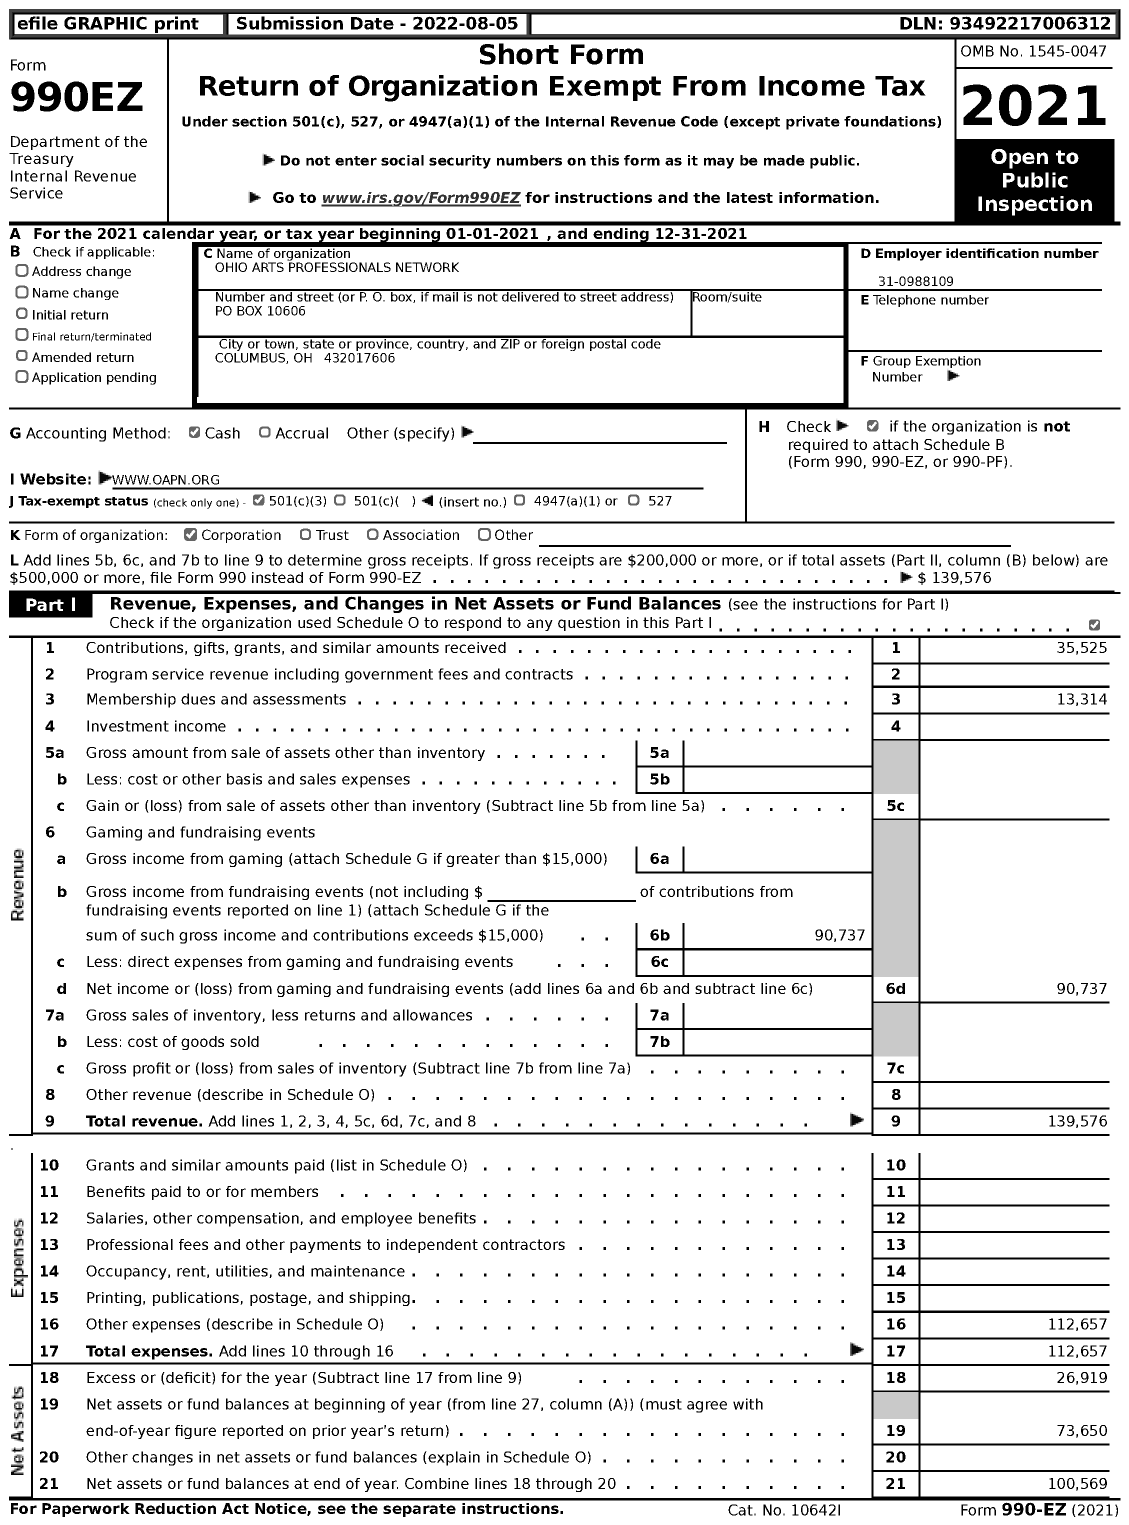 Image of first page of 2021 Form 990EZ for Ohio Arts Professionals Network